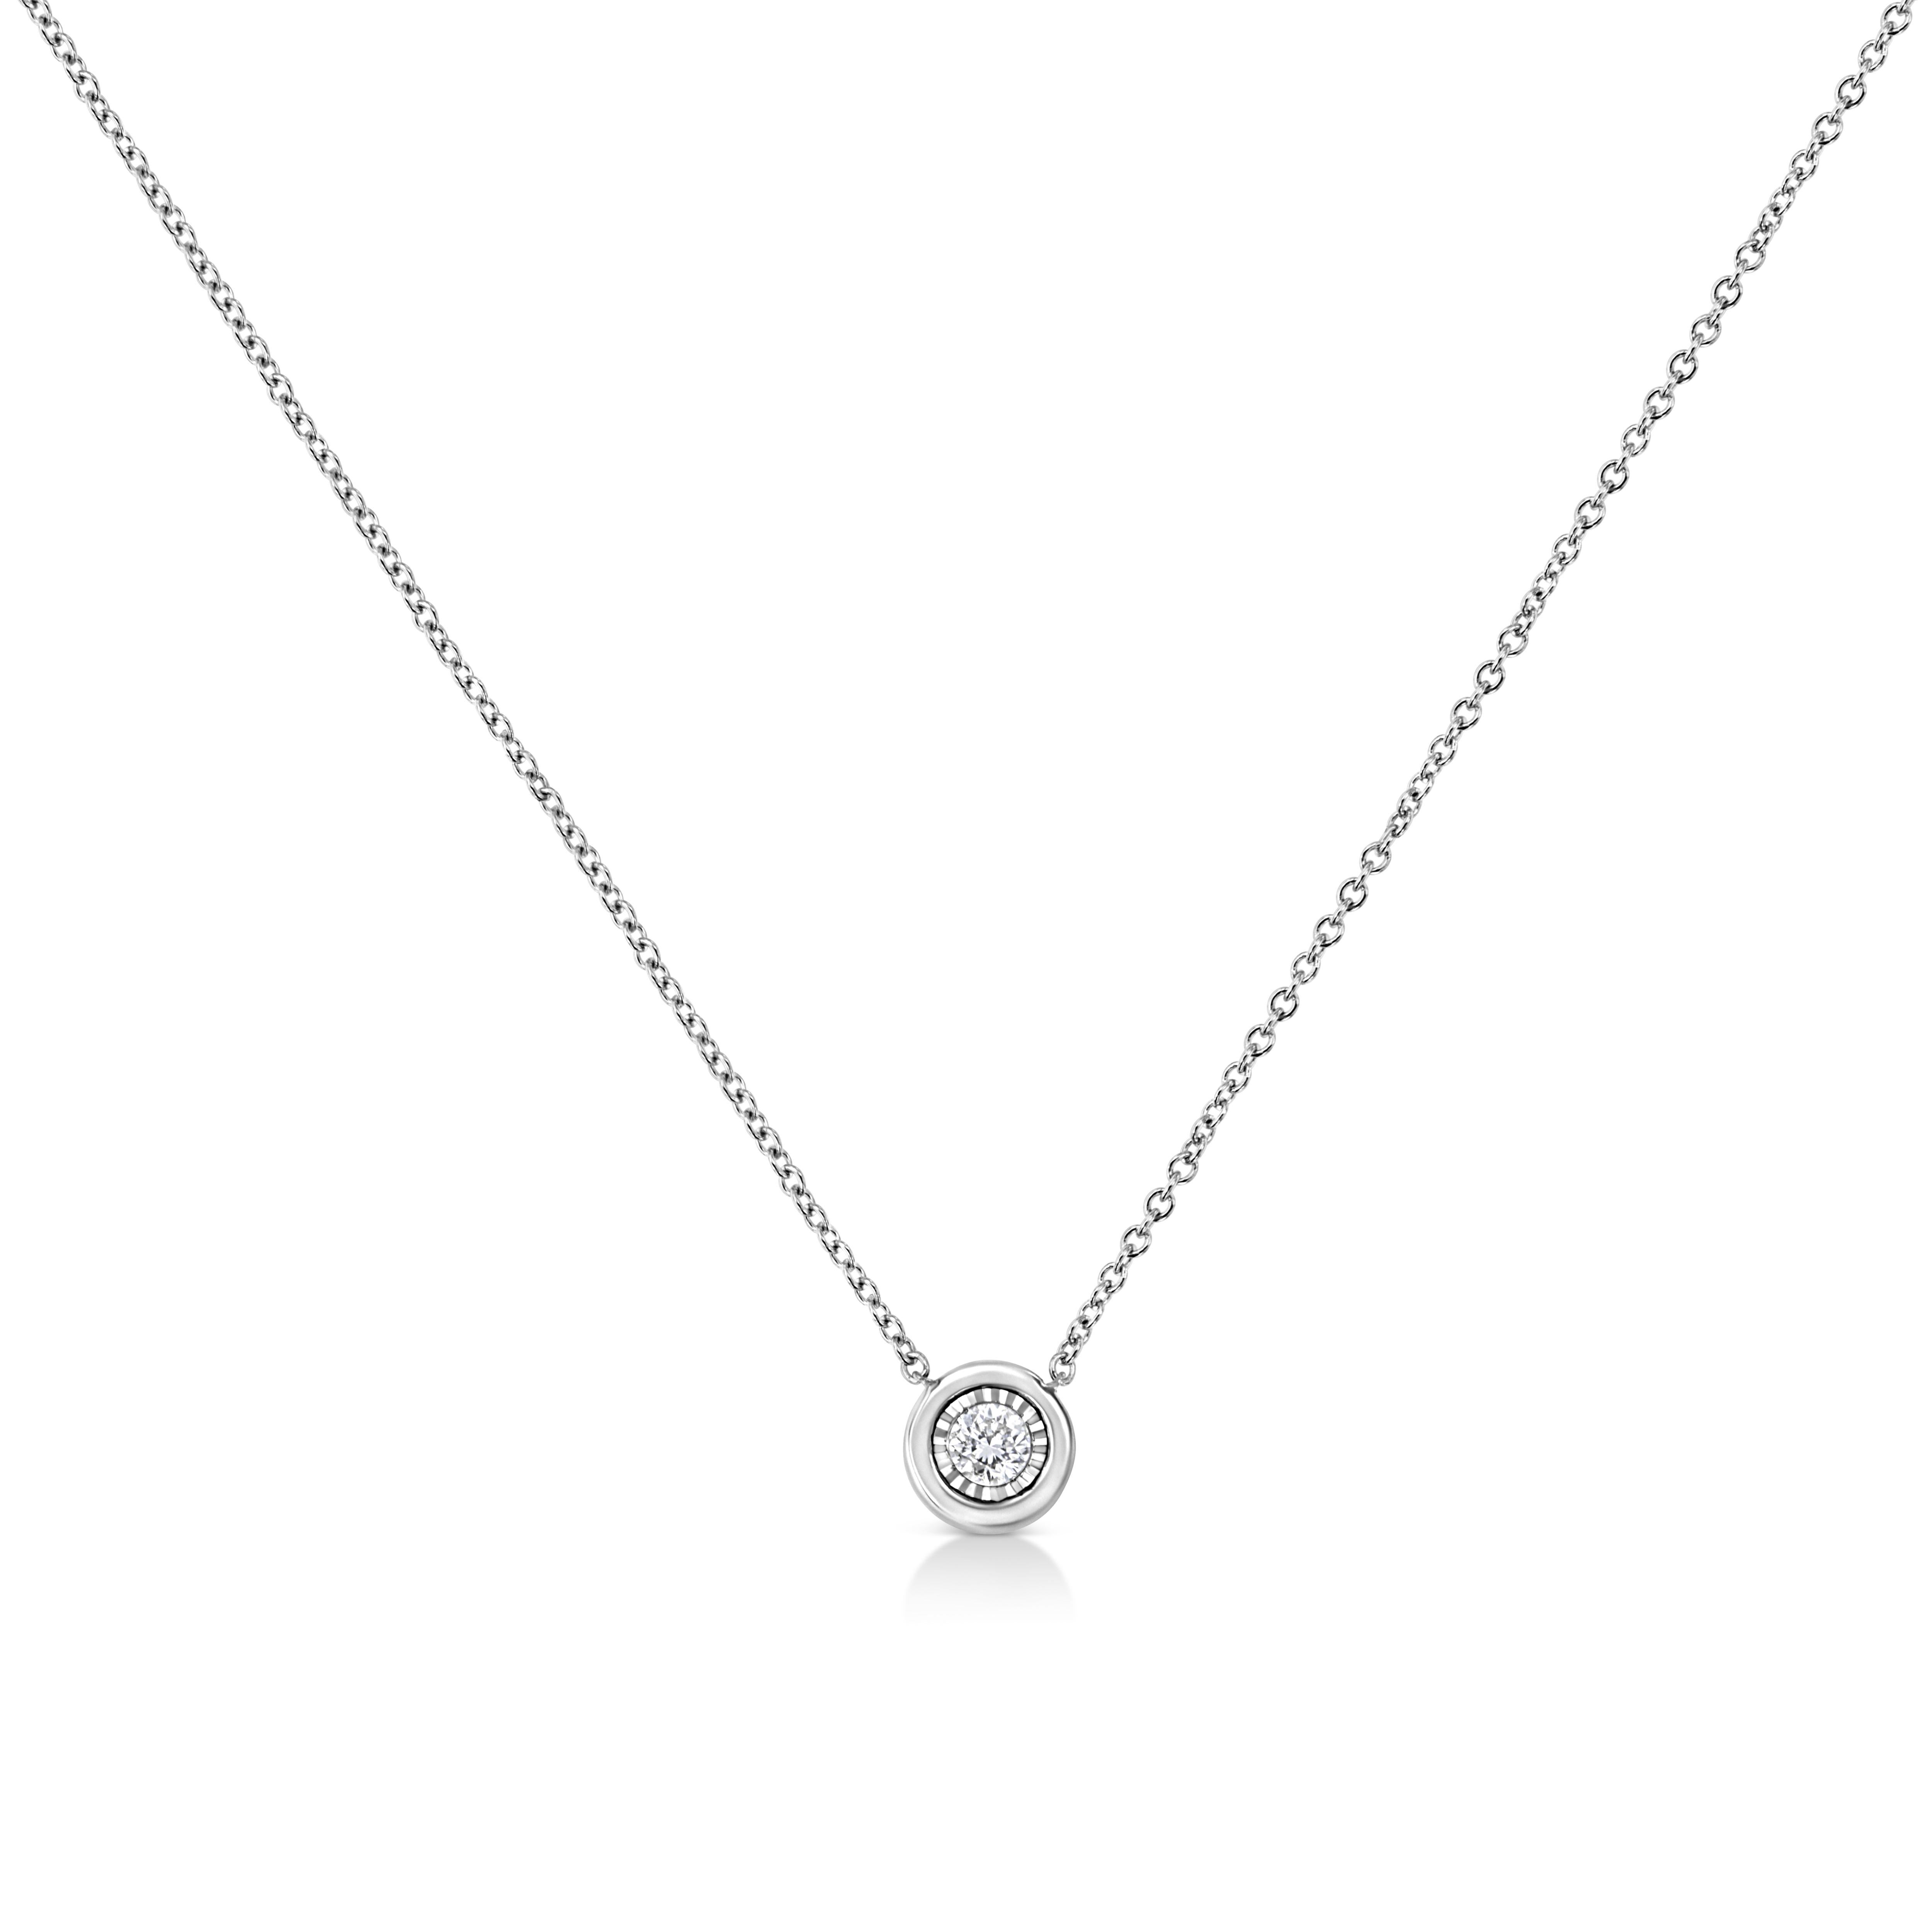 This simple and elegant pendant necklace features a single round brilliant cut diamond. It is the perfect choice to add a little sparkle to any outfit. Crafted in 10 karat white gold, it has a total diamond weight of 1/10 carats. This beautiful